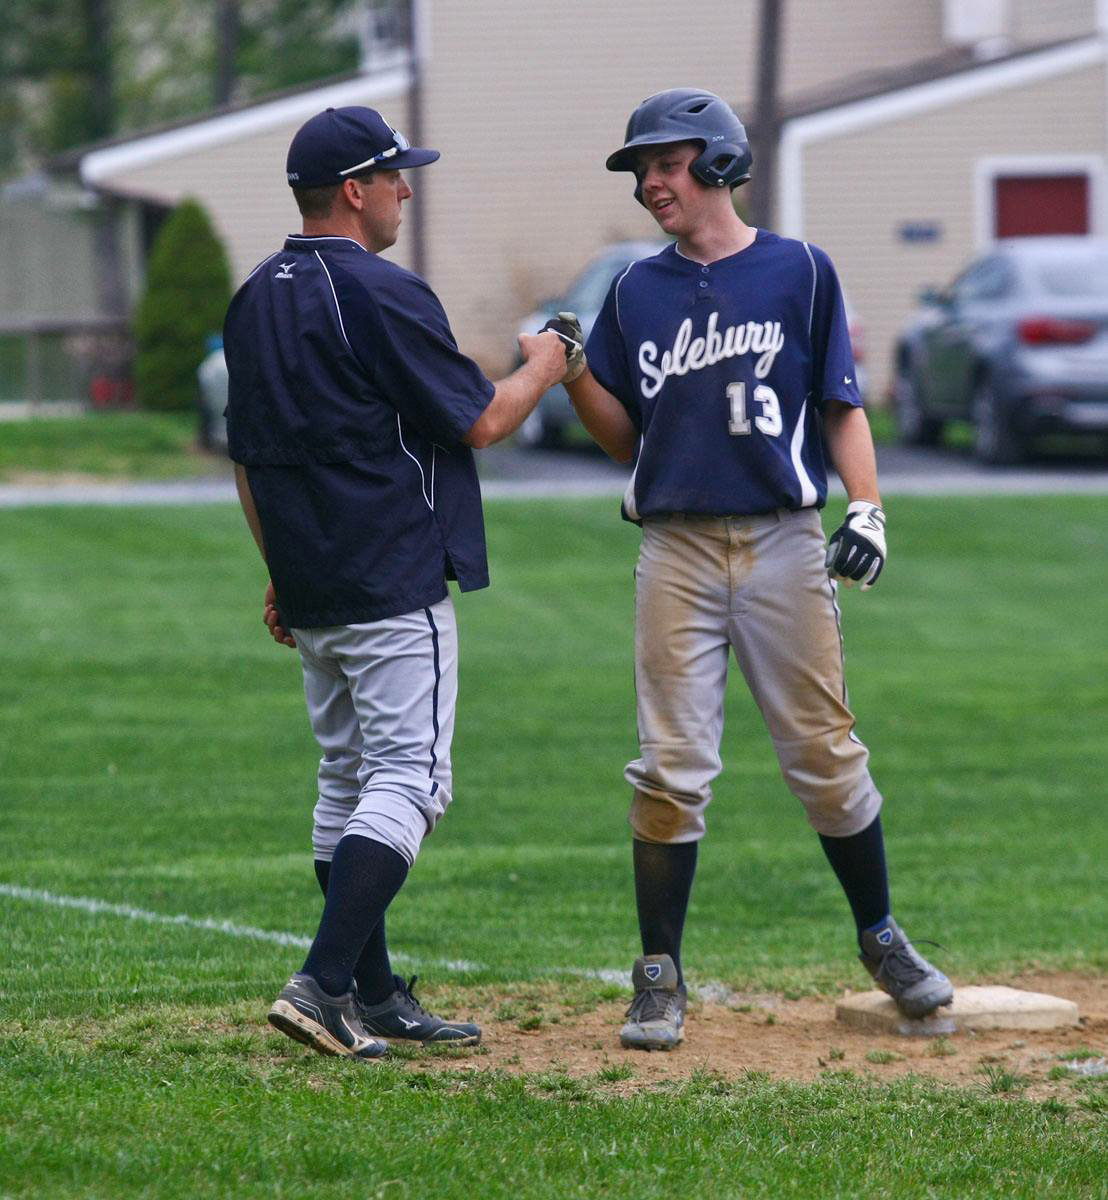 Rob Eichem, who served as Solebury School’s athletic director and varsity baseball coach, gives one of his players a fist bump.